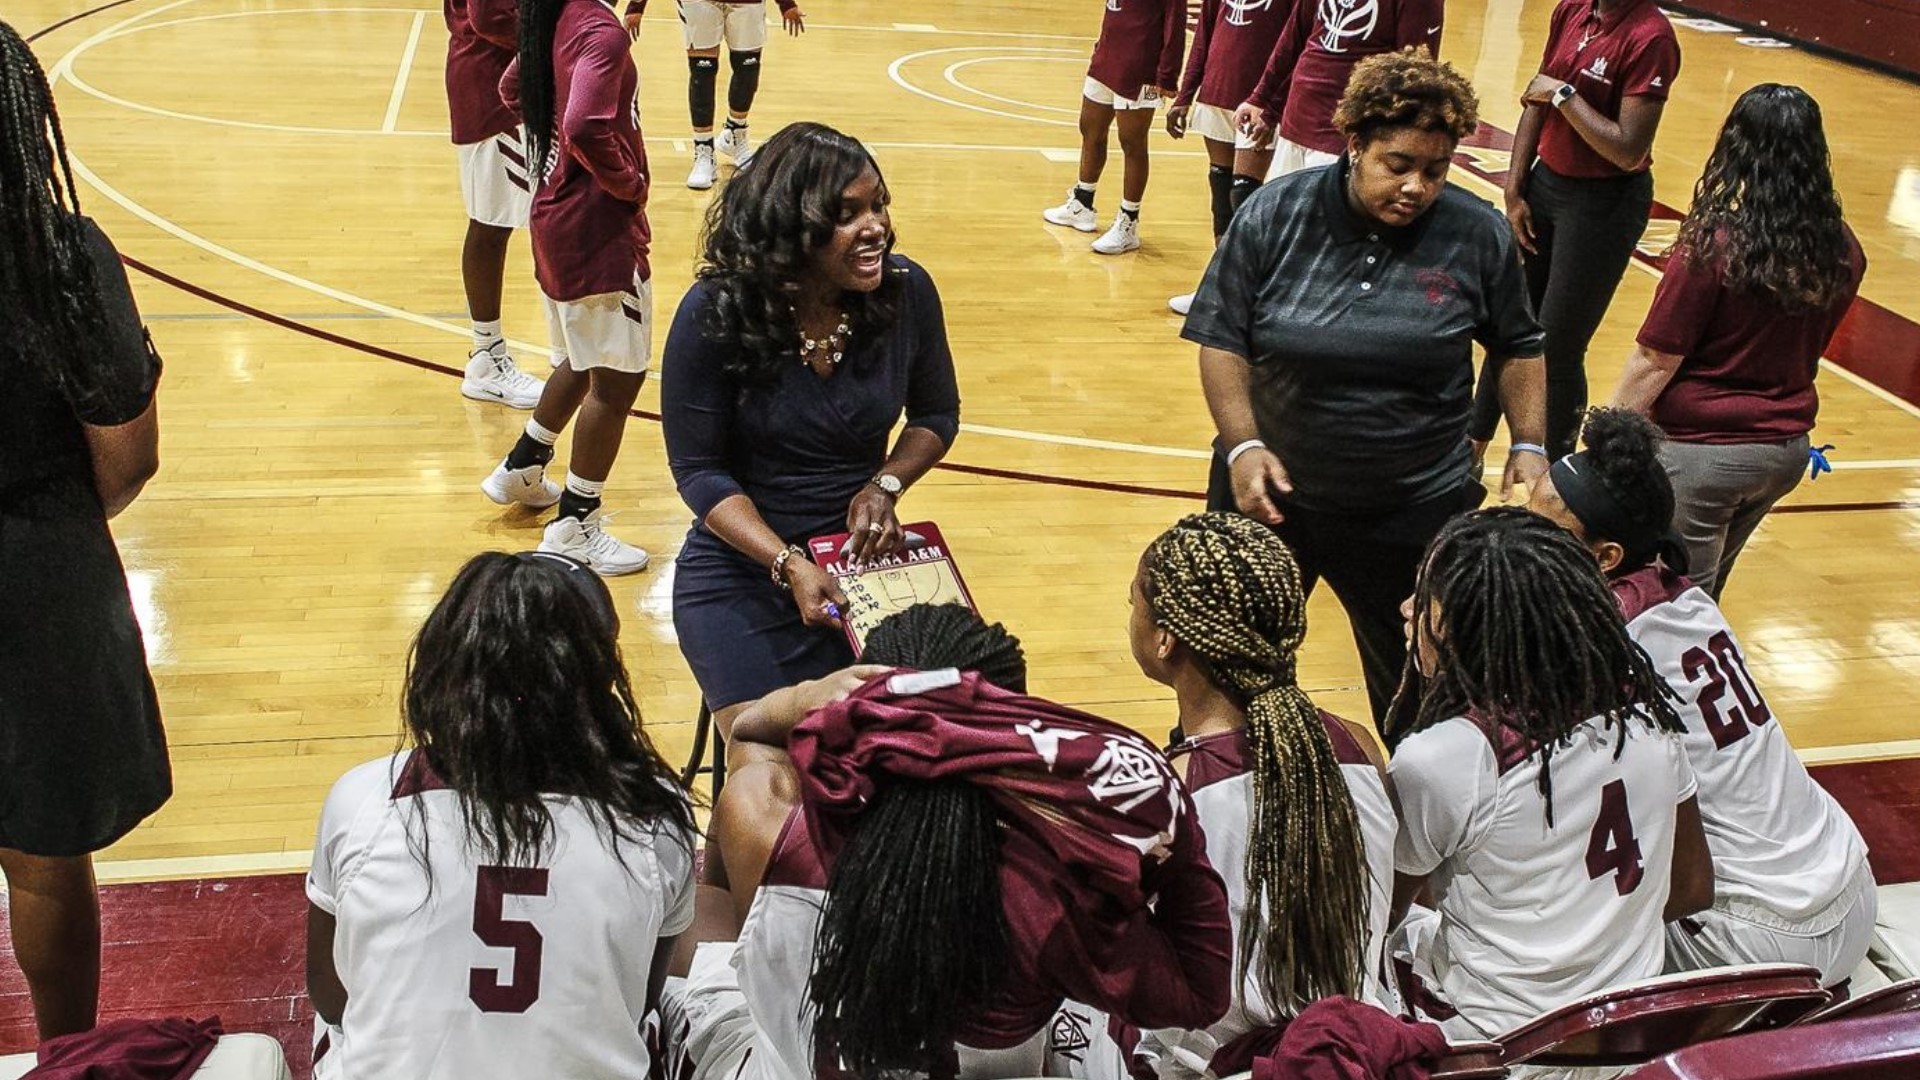 Margaret Richards has stepped down from her position as the head coach of AAMU women's basketball to pursue other opportunities.